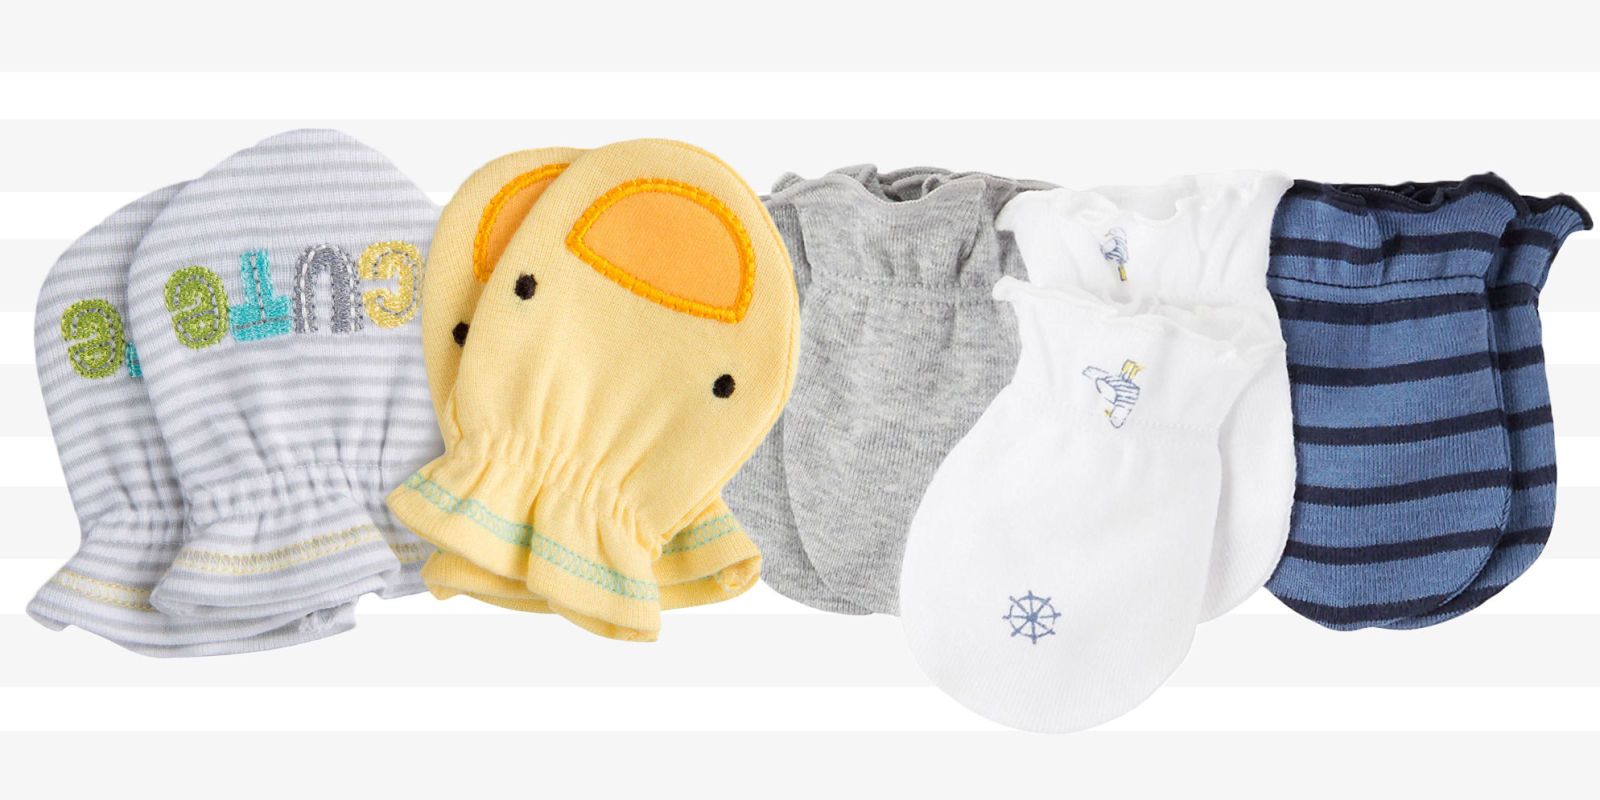 HEALLILY 7 Pairs Baby Anti Scratching Gloves Cotton Newborn No Scratch Mittens Face Protection Soft Gloves Mitts for Infant Boys and Girls Mixed Style 